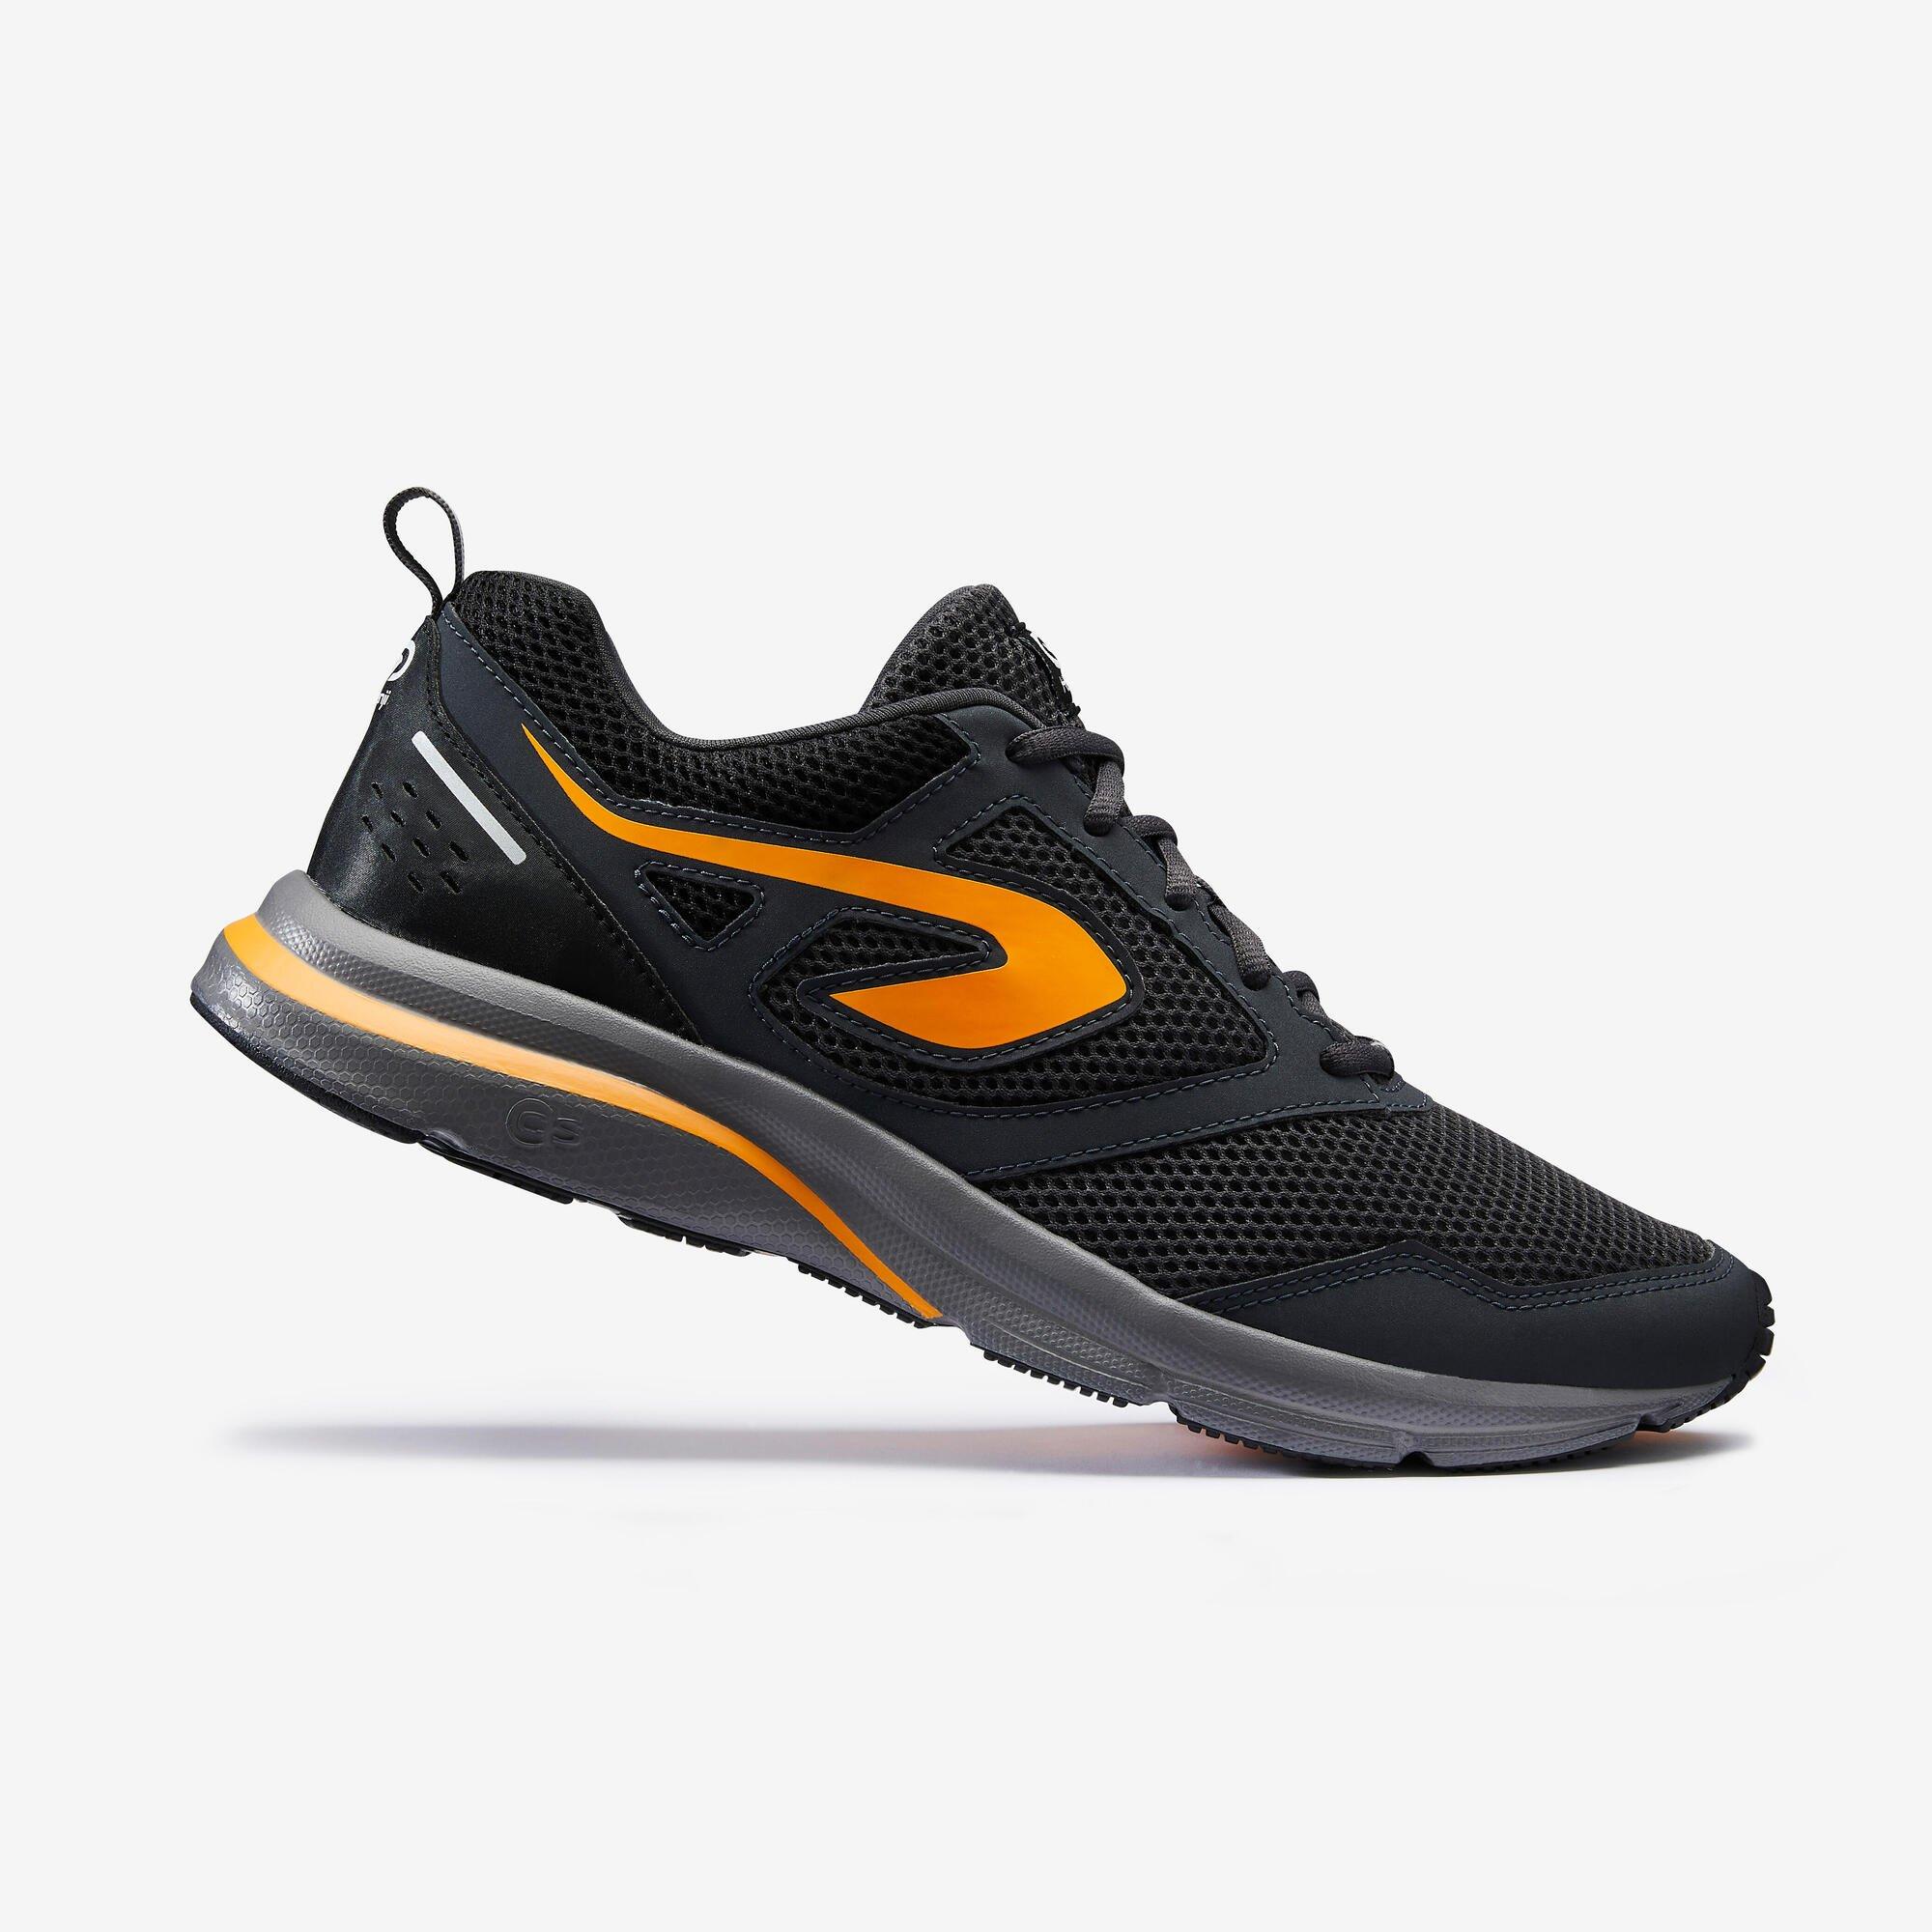 Trainers, Decathlon Run Active Running Shoes